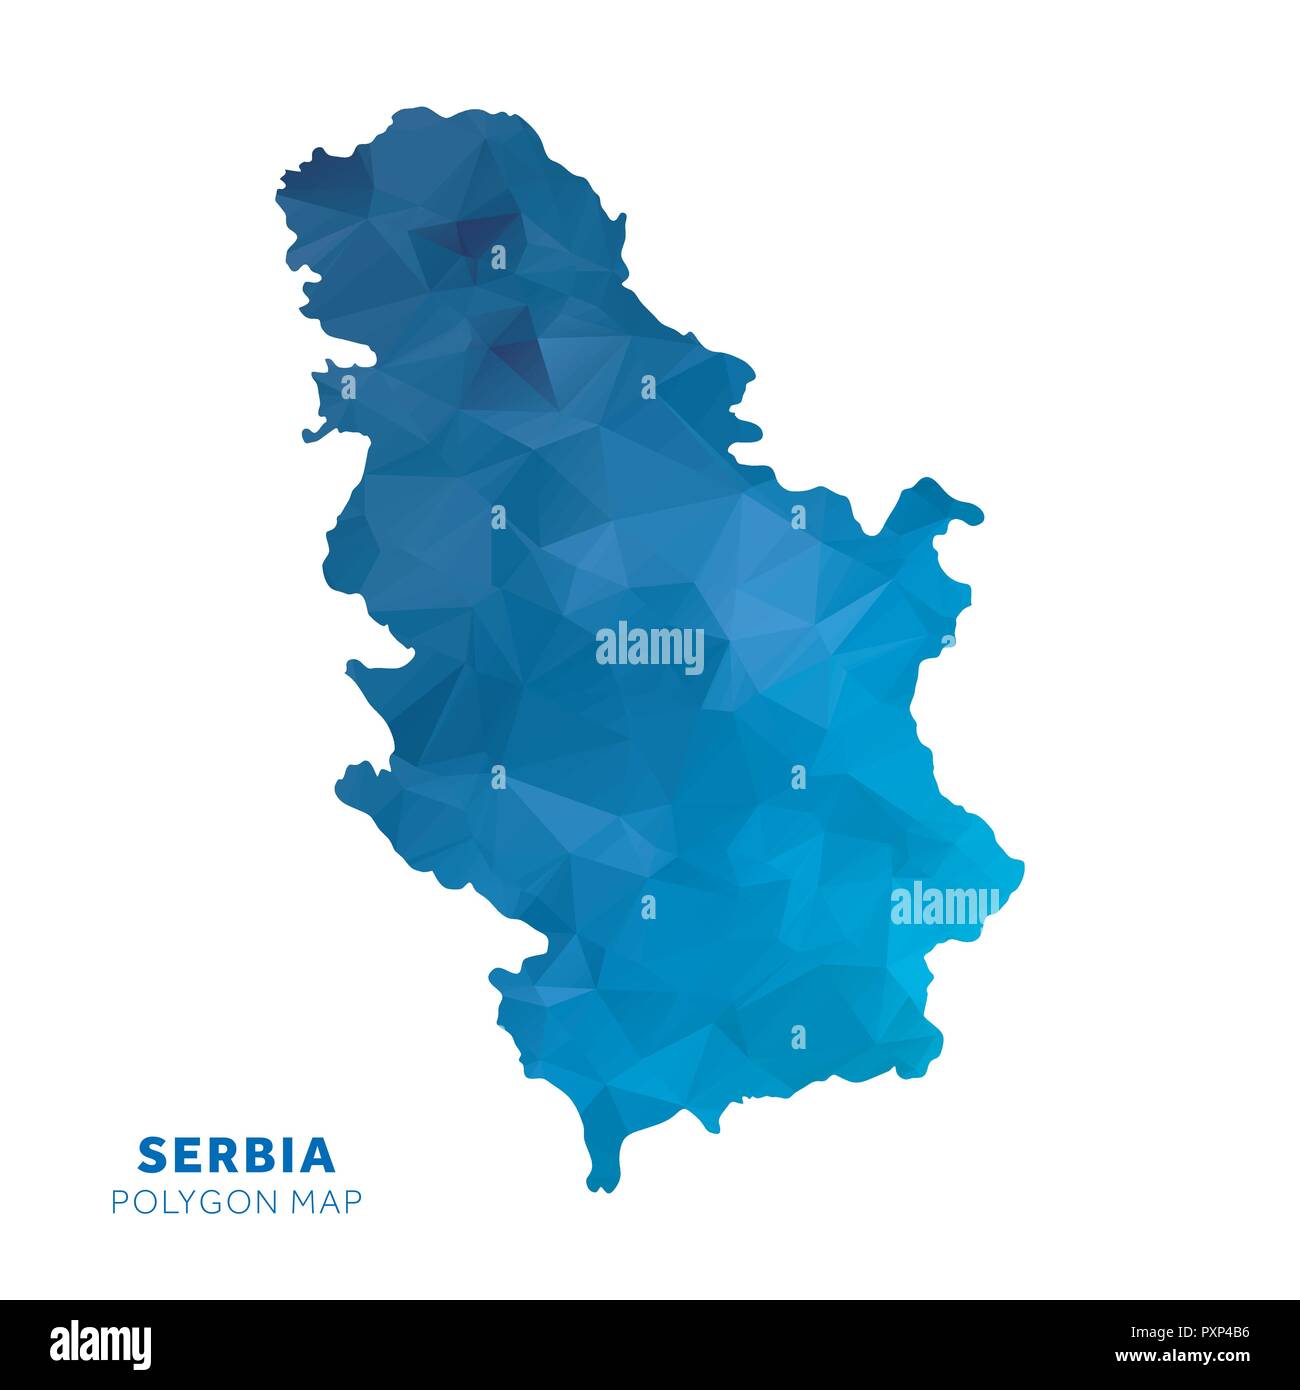 Map of Serbia. Blue geometric polygon map. Stock Vector